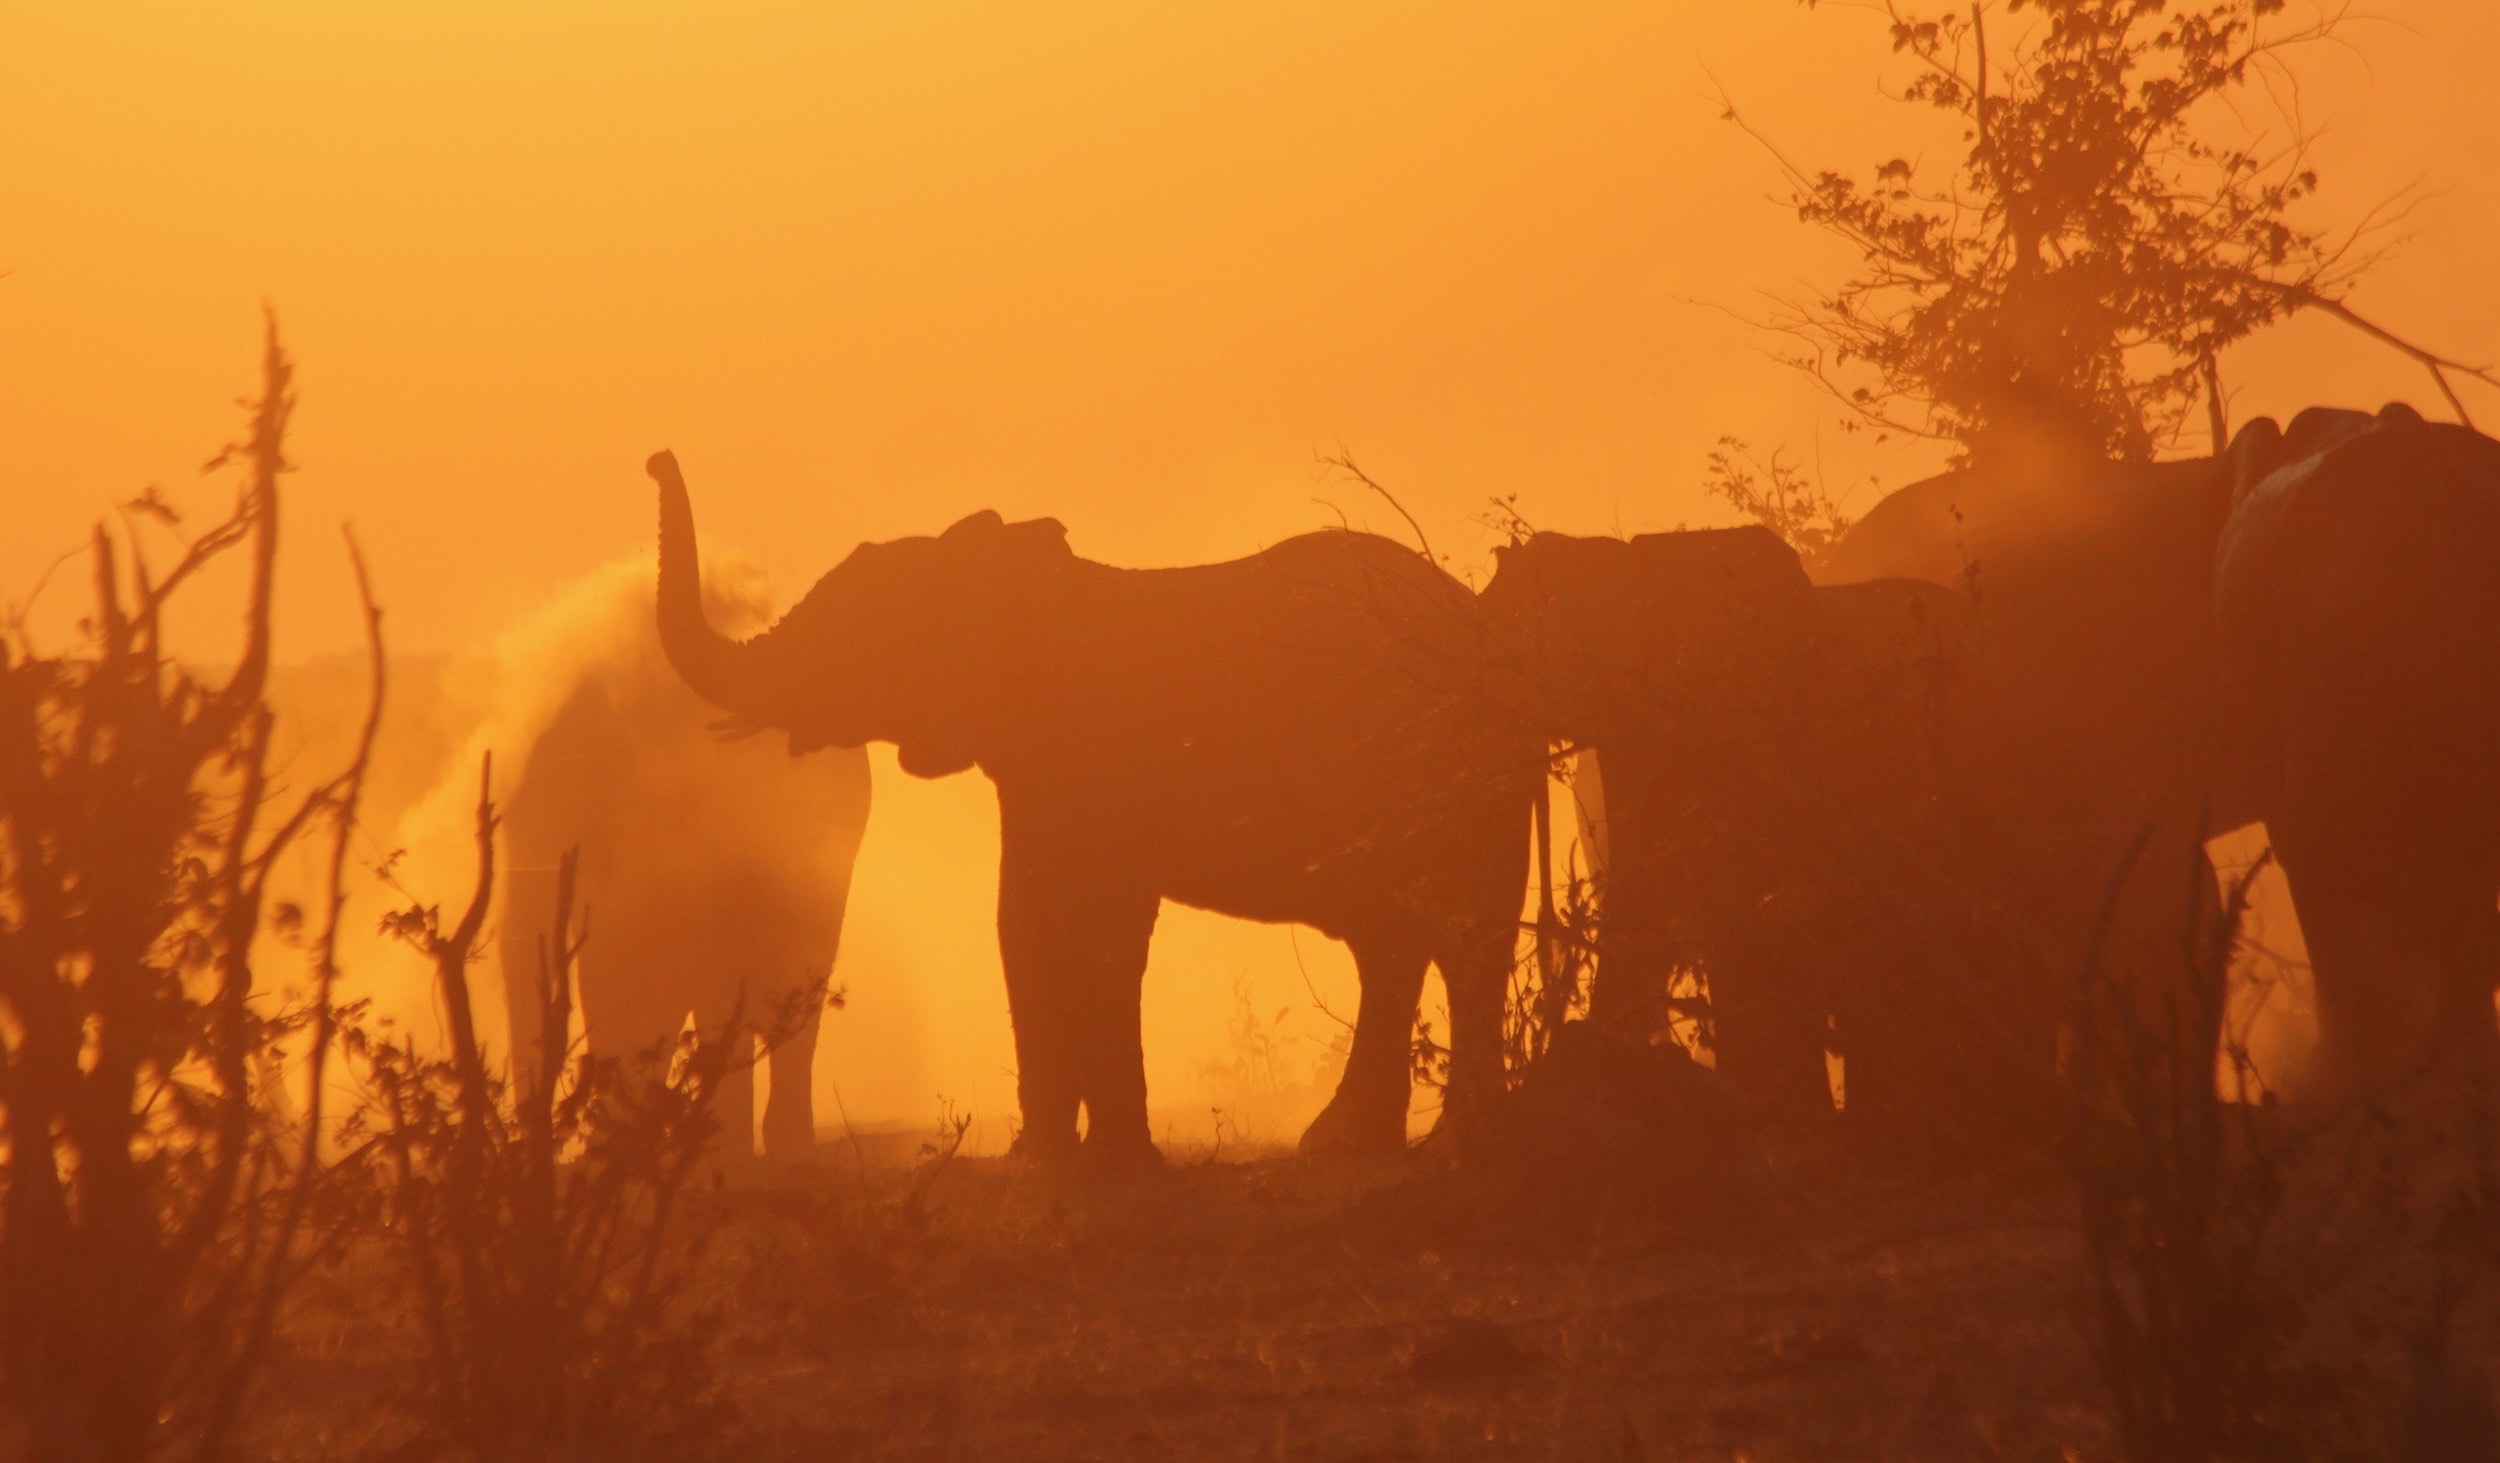 Elephants silhouetted against the setting sun.